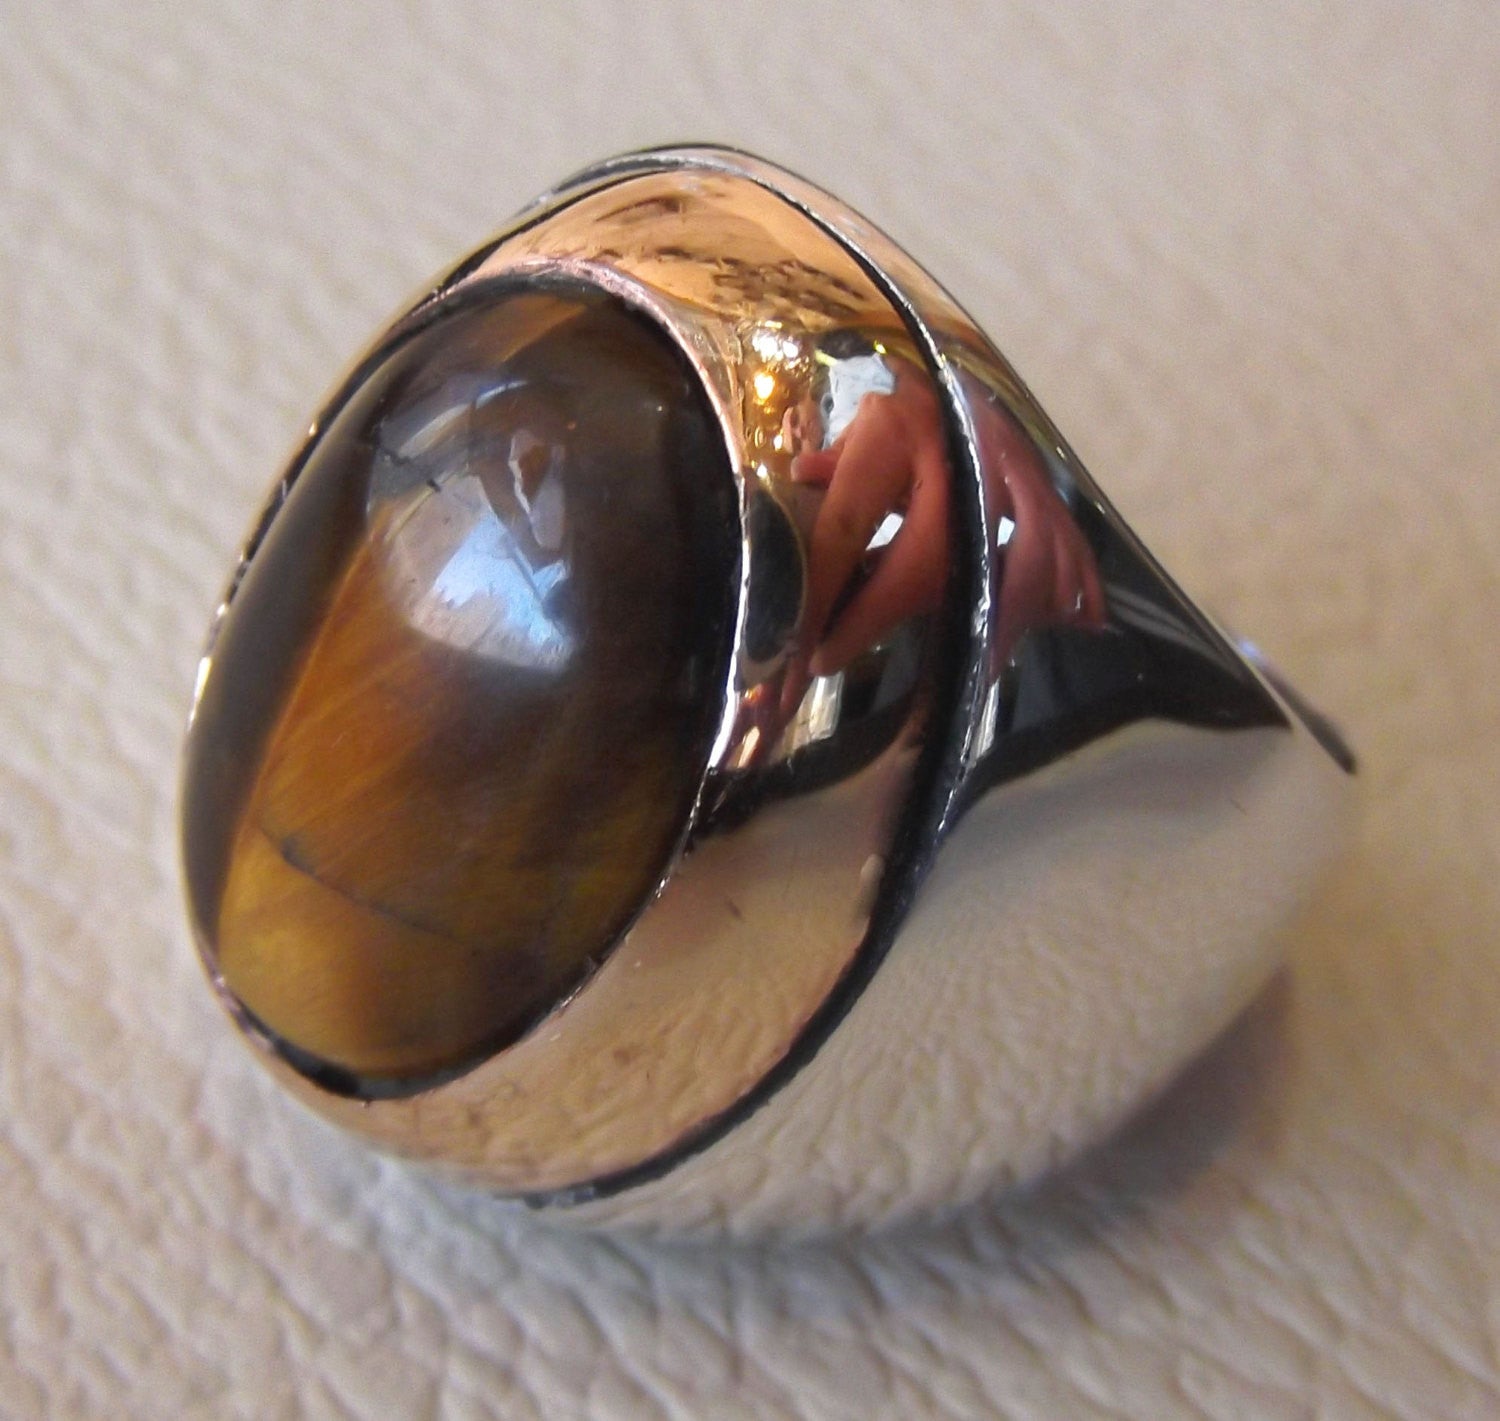 tiger eye big oval cabochon two tone men ring sterling silver 925 bronze frame cat eye semi precious natural stone all sizes jewelry